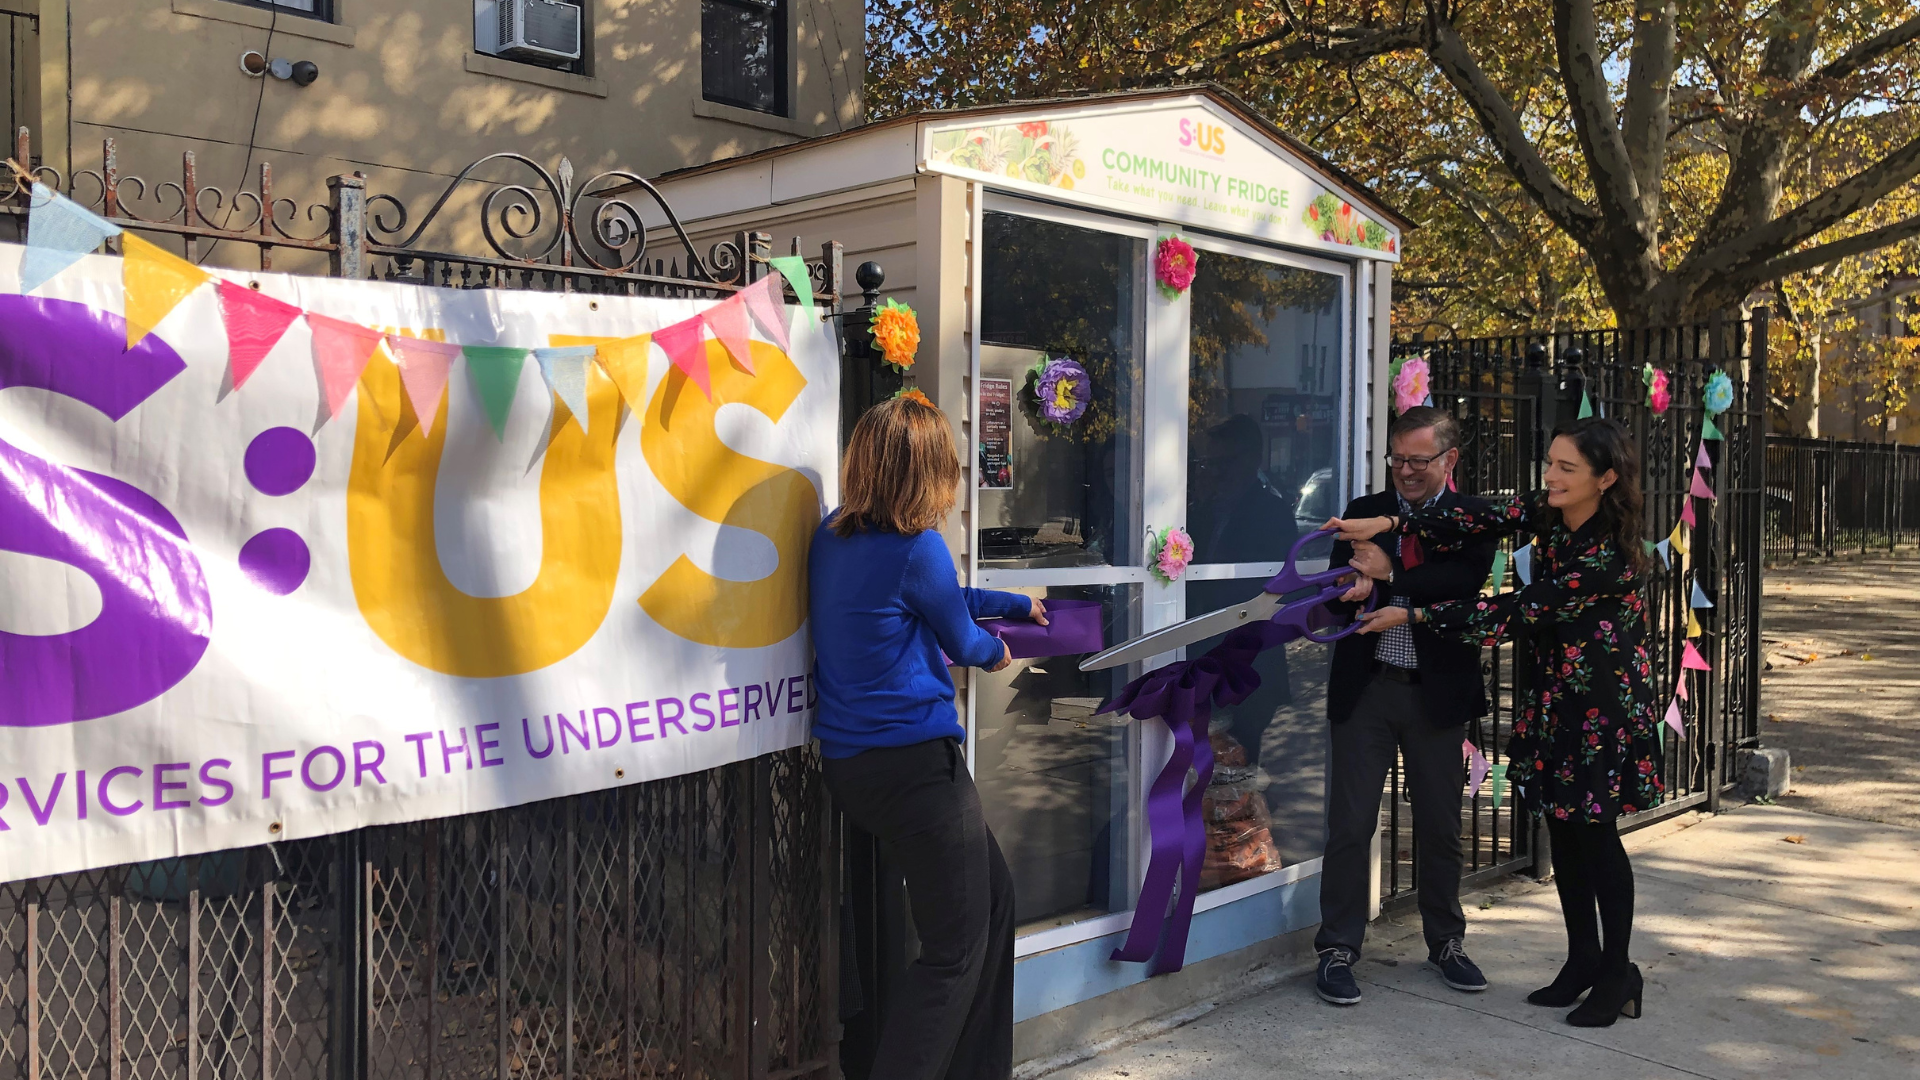 Services for the UnderServed Launches Community Fridge Project in Brooklyn with State Senator Salazar